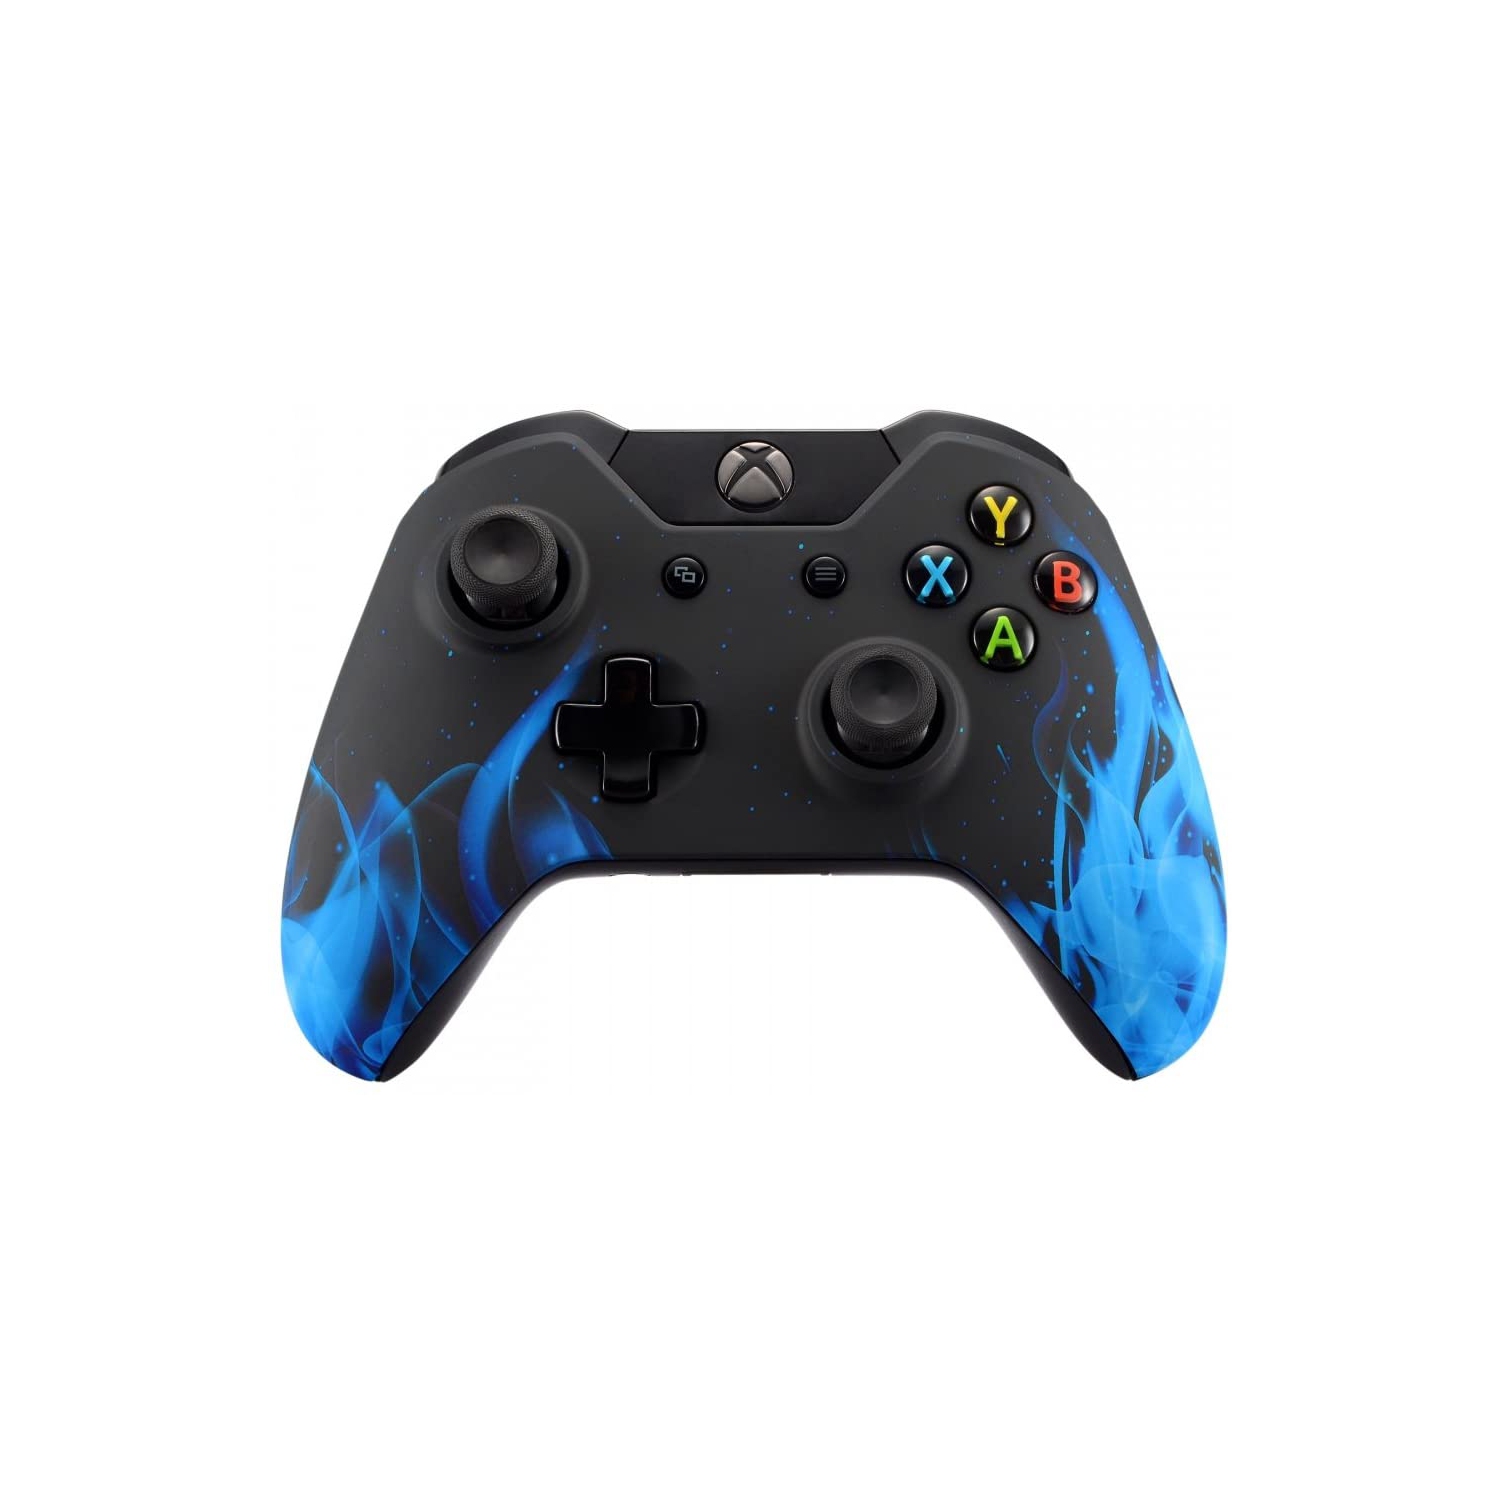 Blue Flame Soft Touch Grip Front Housing Shell Faceplate for Standard Xbox One Controller (Fits Both